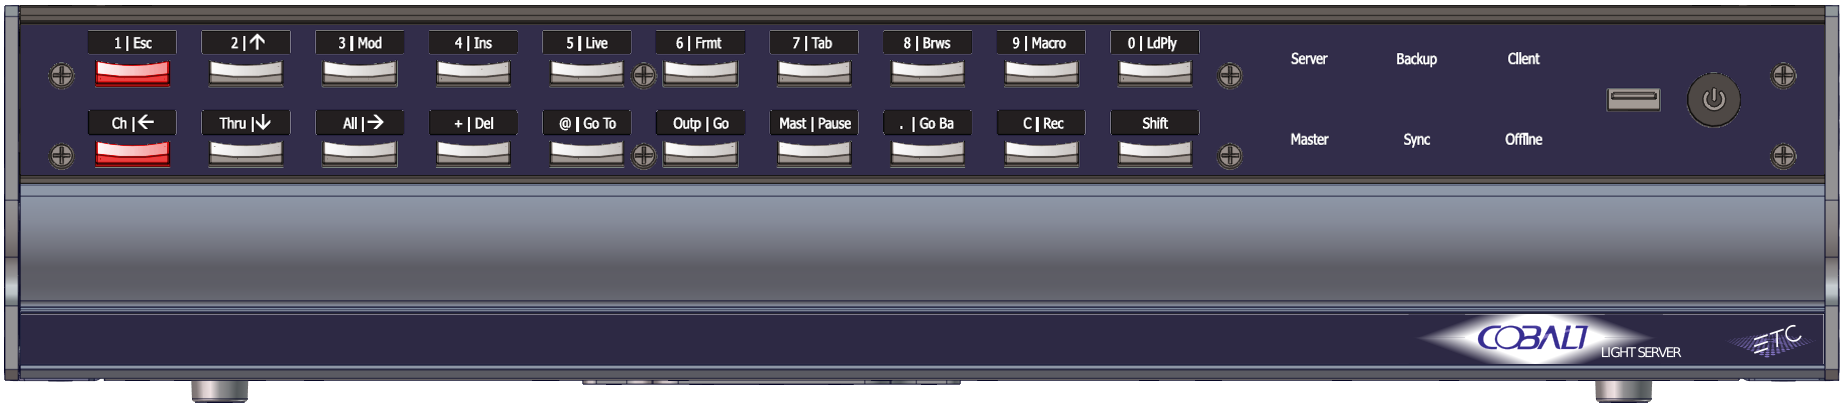 Cobalt Light Server with Labels Buttons Selected.png